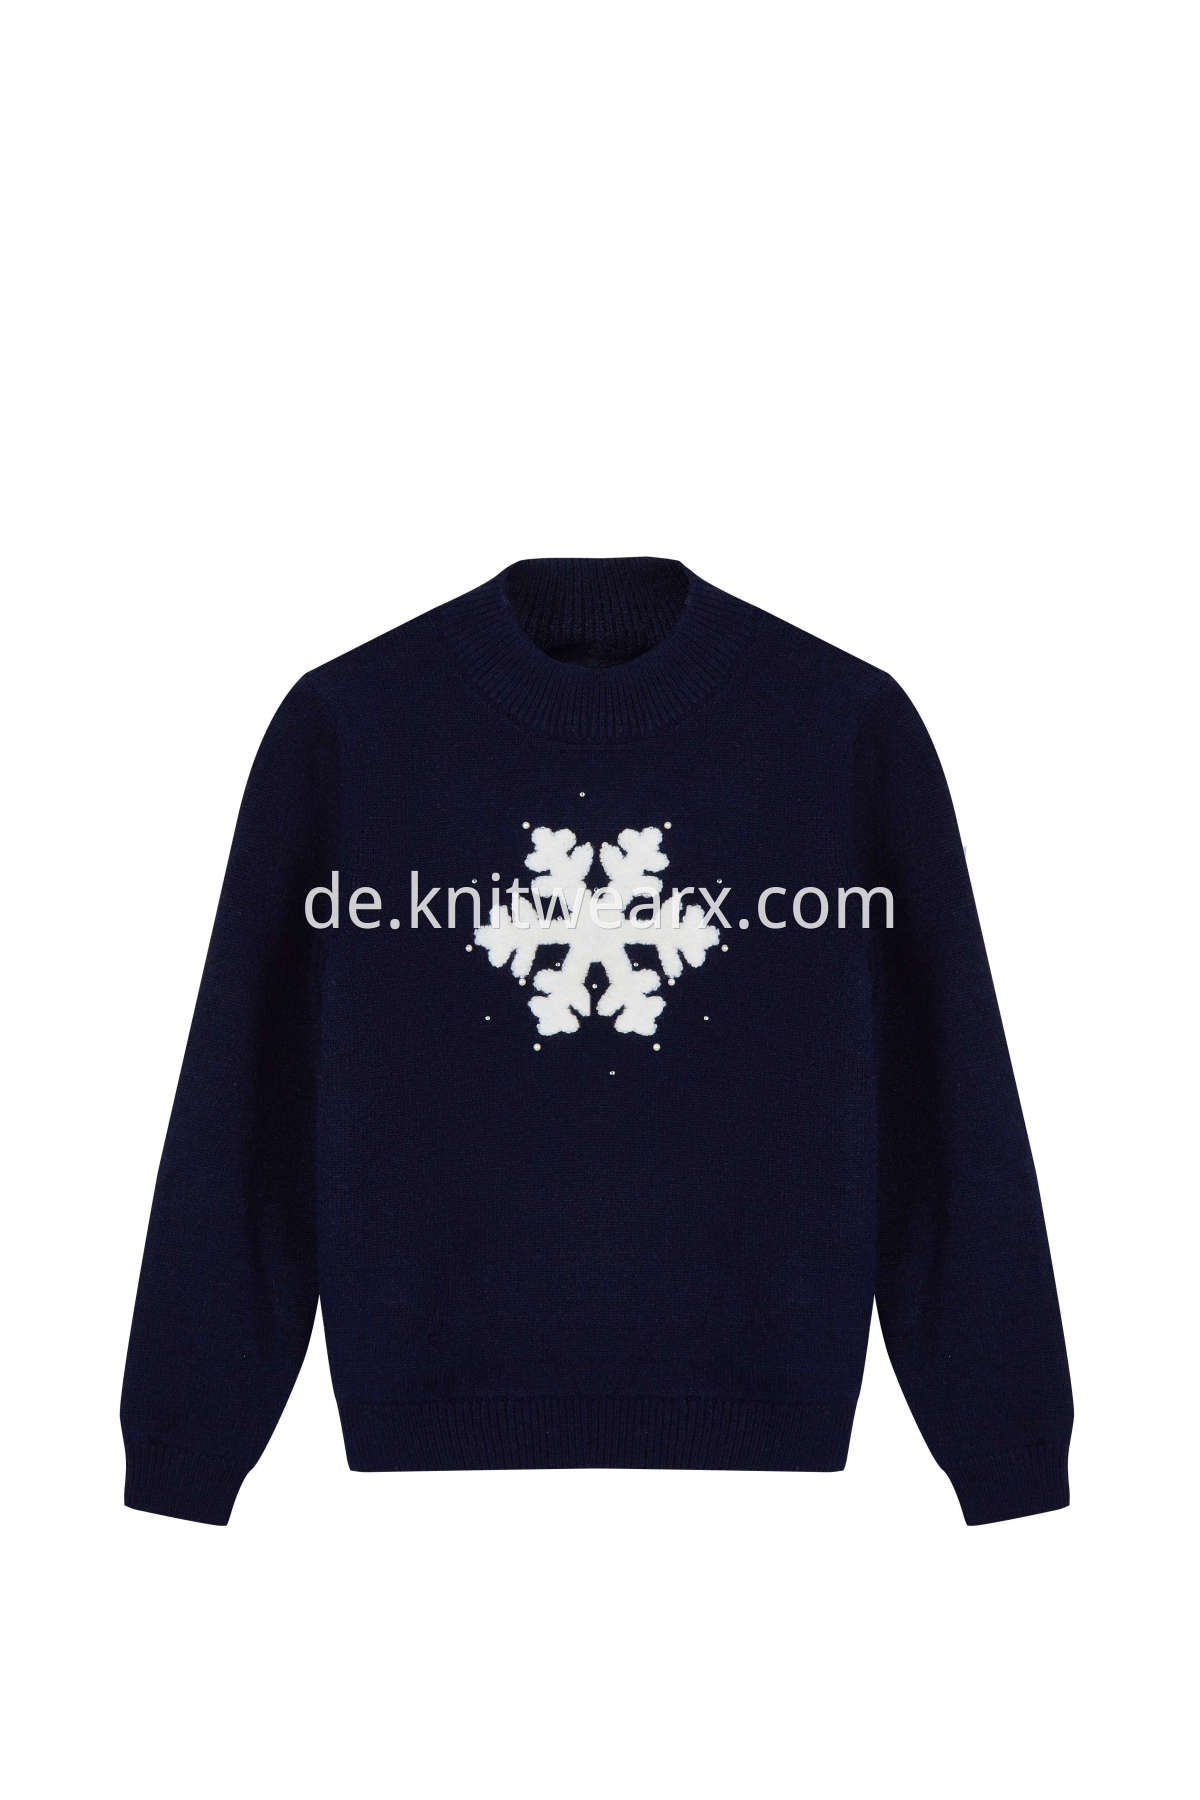 Girl's Nice Snowflake Sweater Long Sleeve Pullover Top